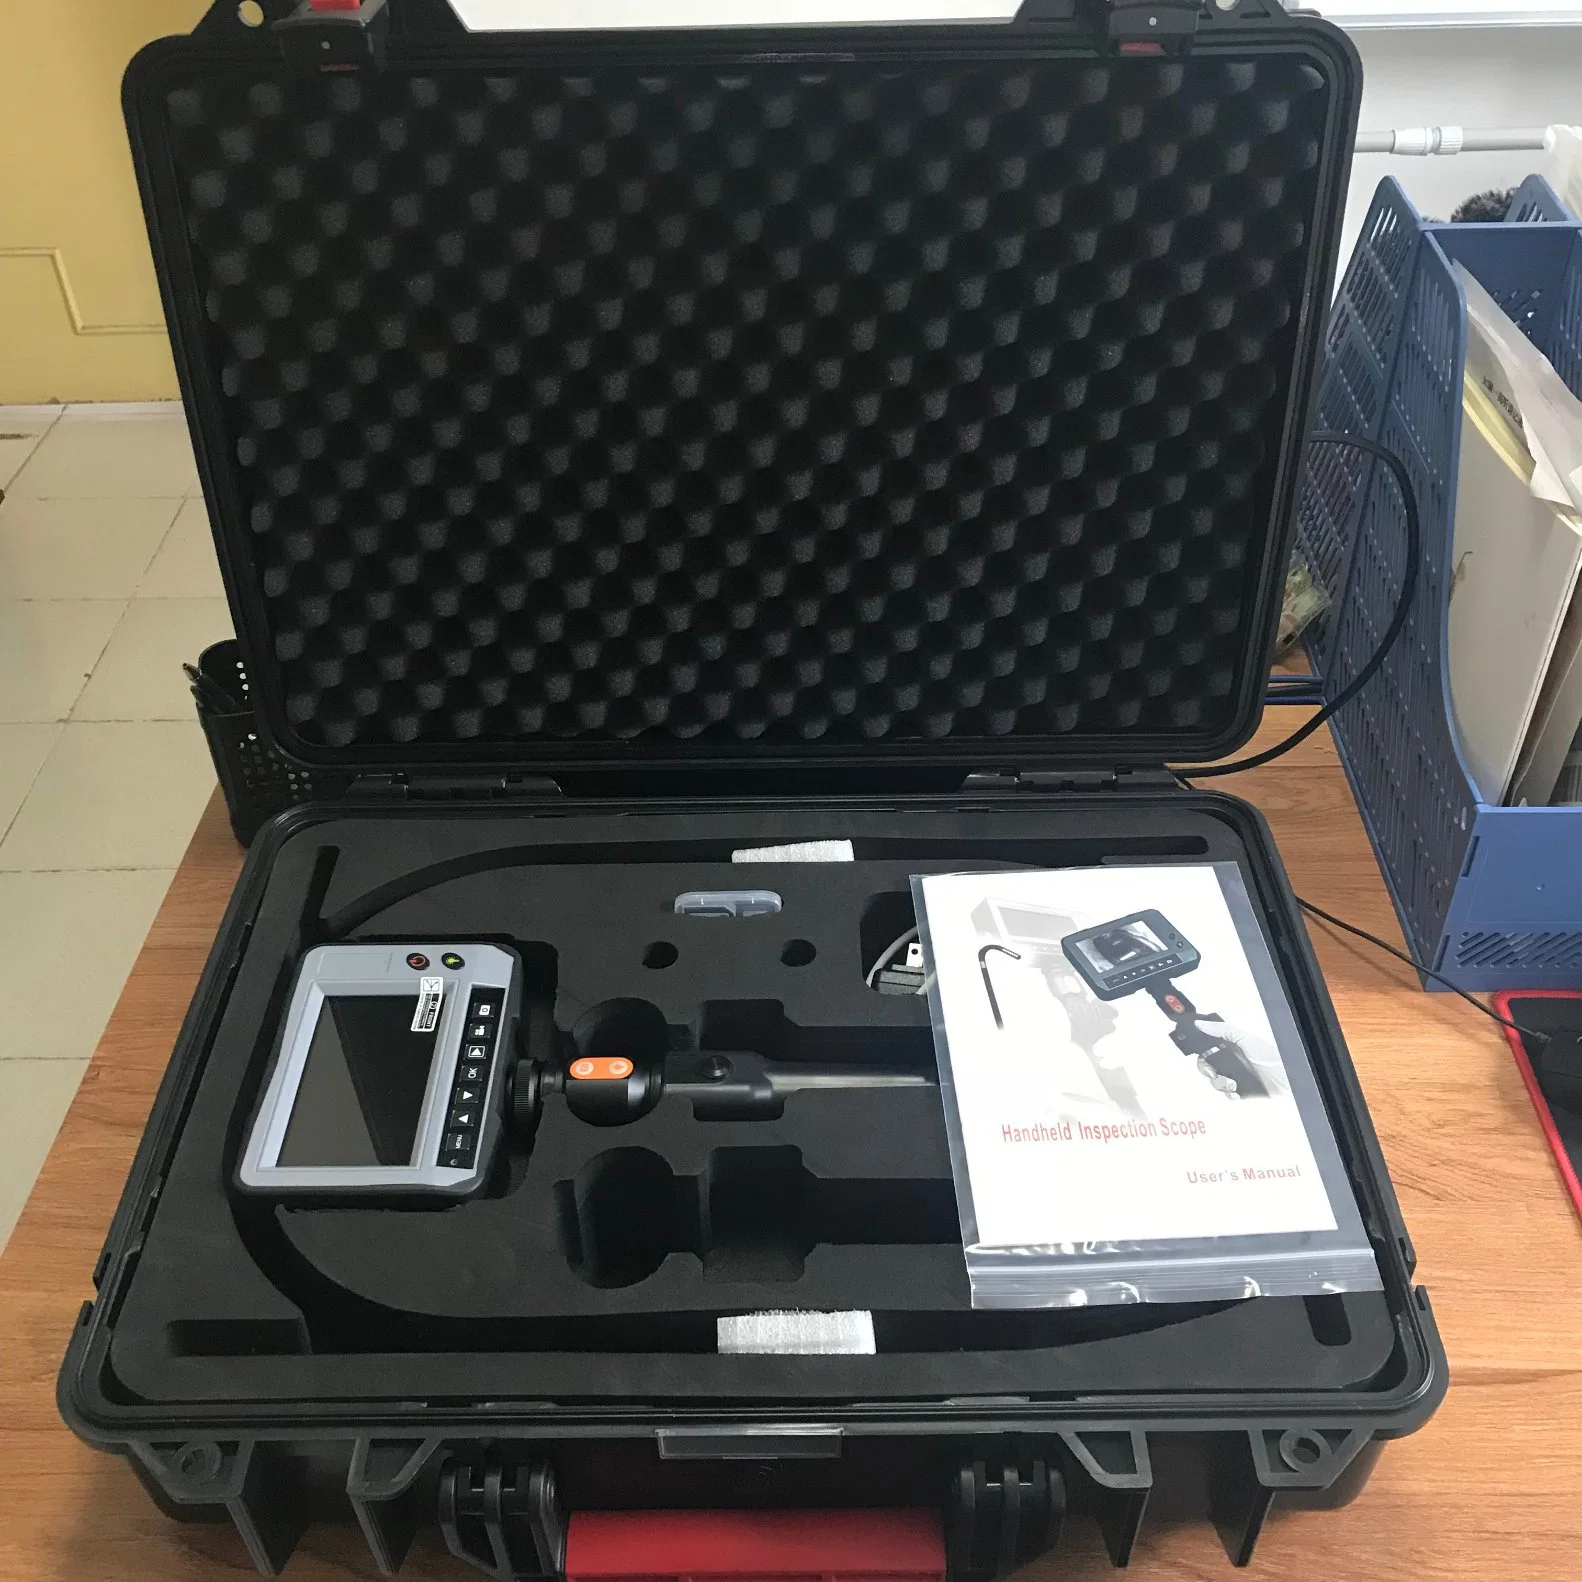 Infrared Video Endoscope with IR940nm, 4-Way Articulation, 1.5m Testing Cable